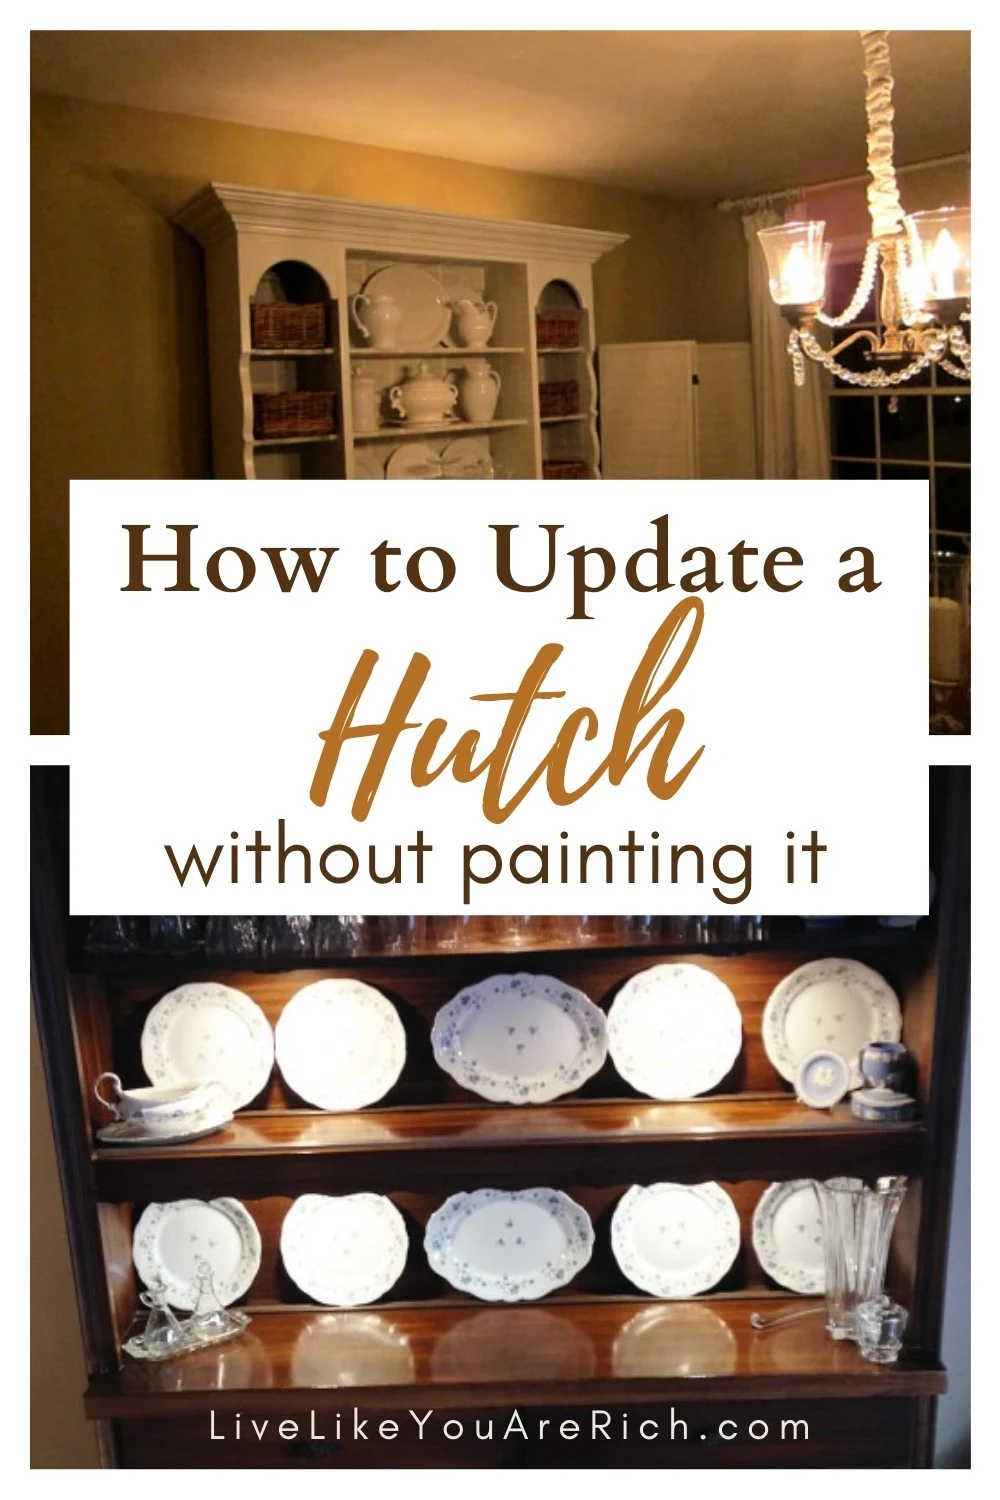 You don’t have to painstakingly sand, prime and paint an old hutch in order to update it. My mom has a gorgeous very large hutch. We are renovating her dining room and wanting to update it. Ultimately repainting it was going to be too much work. Plus, it already matched the new hard wood and dining room set, and even the  french doors. So we decided to come up with other ways to update it. Here are 9 ways to update a hutch without repainting it. #hutch #makeover